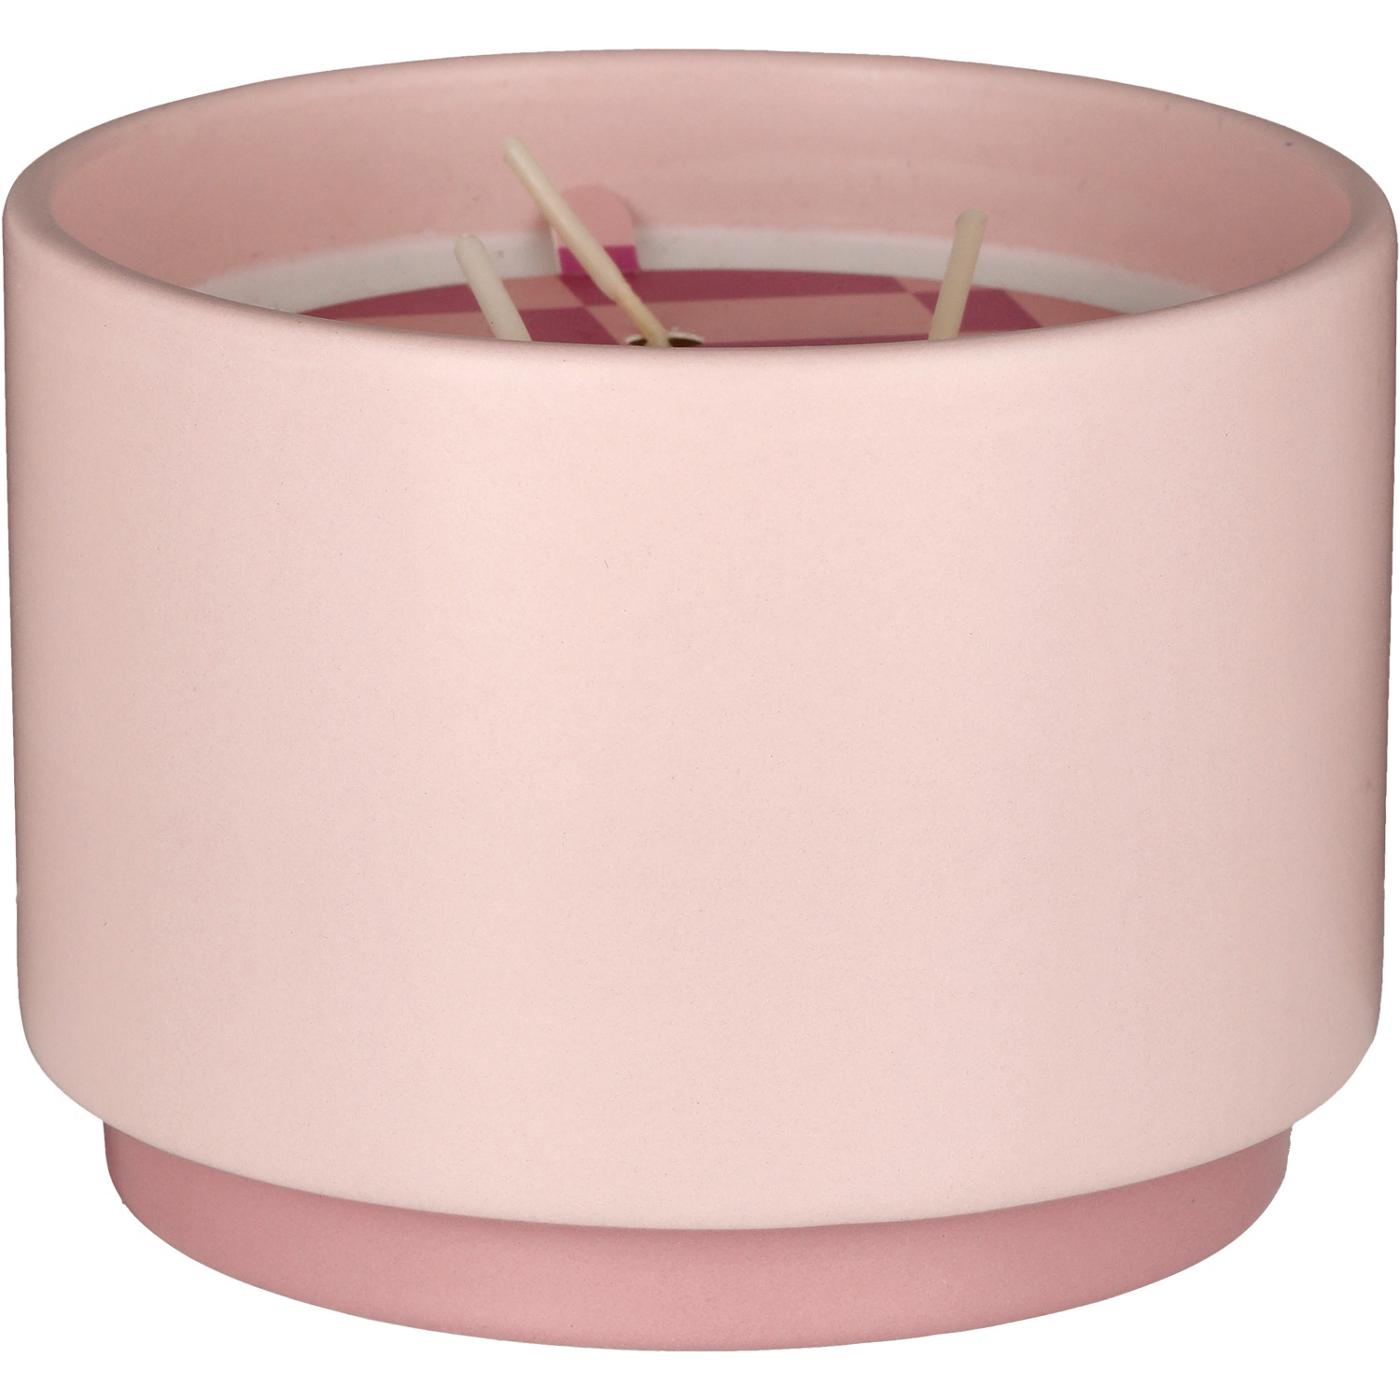 Destination Holiday Ceramic Satin Matte Pink Soiree Scented Candle; image 1 of 3